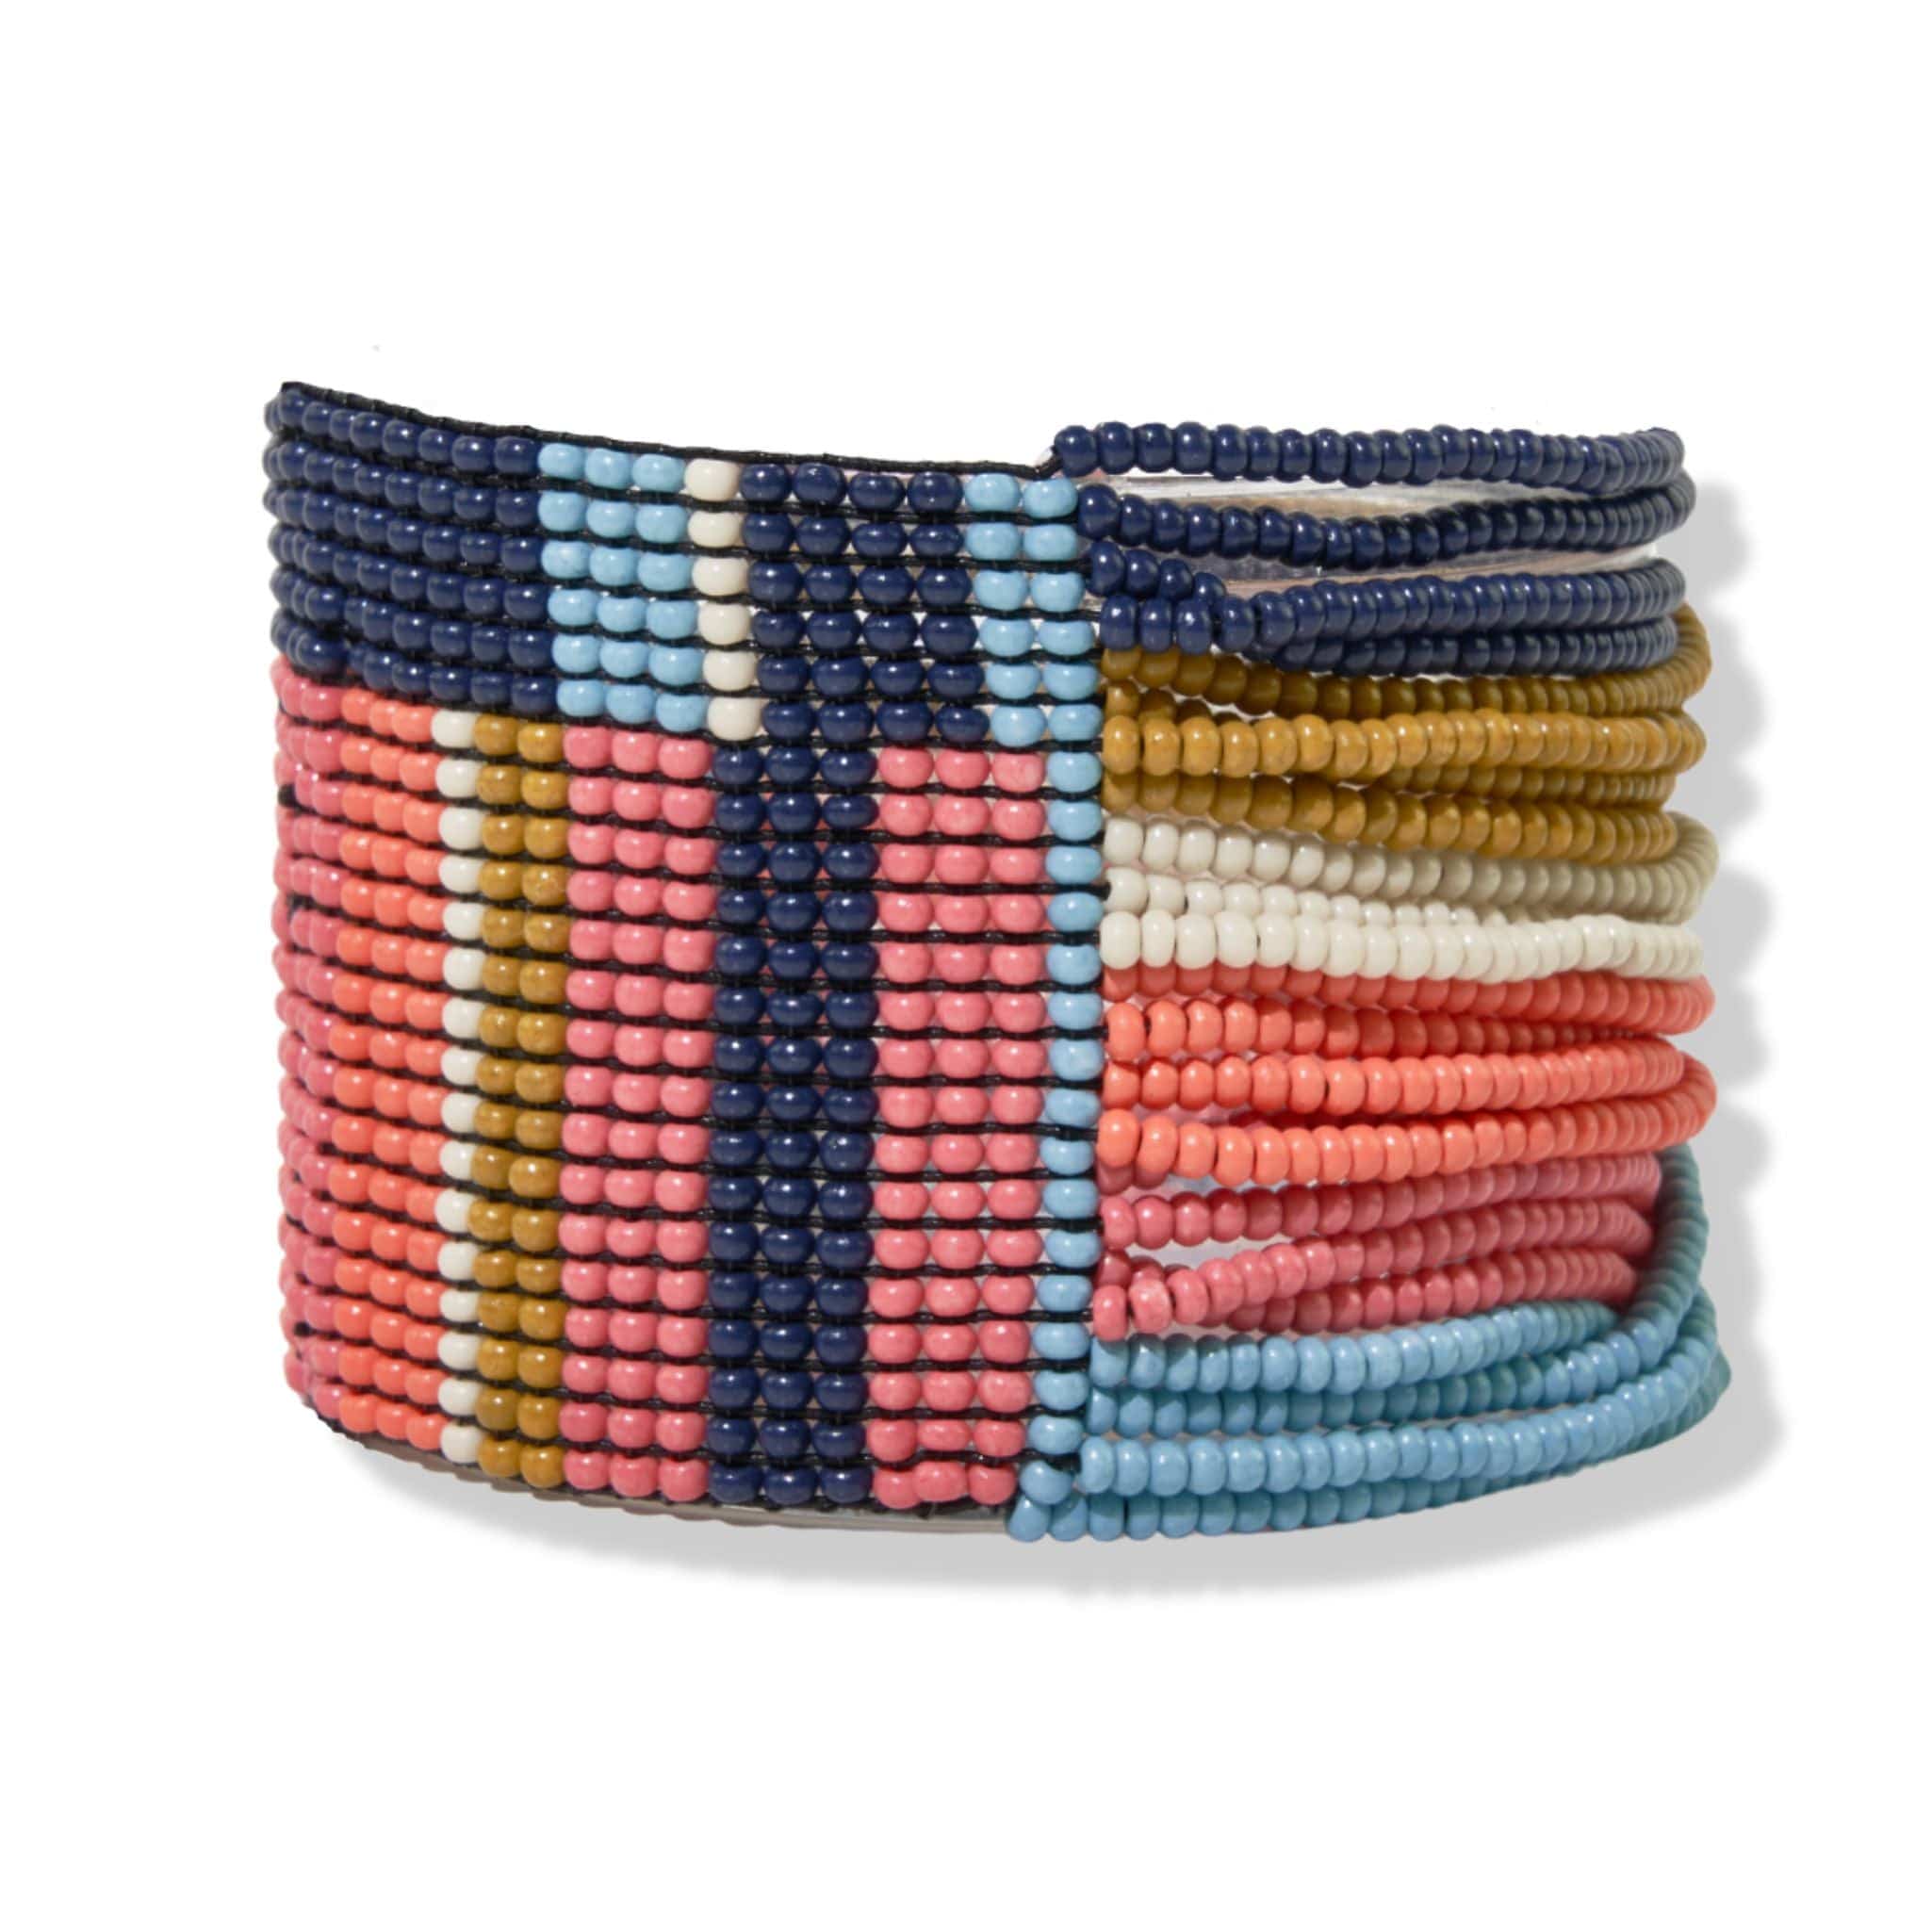 Olive Checkered Beaded Stretch INK+ALLOY, Rainbow – Muted LLC Bracelet